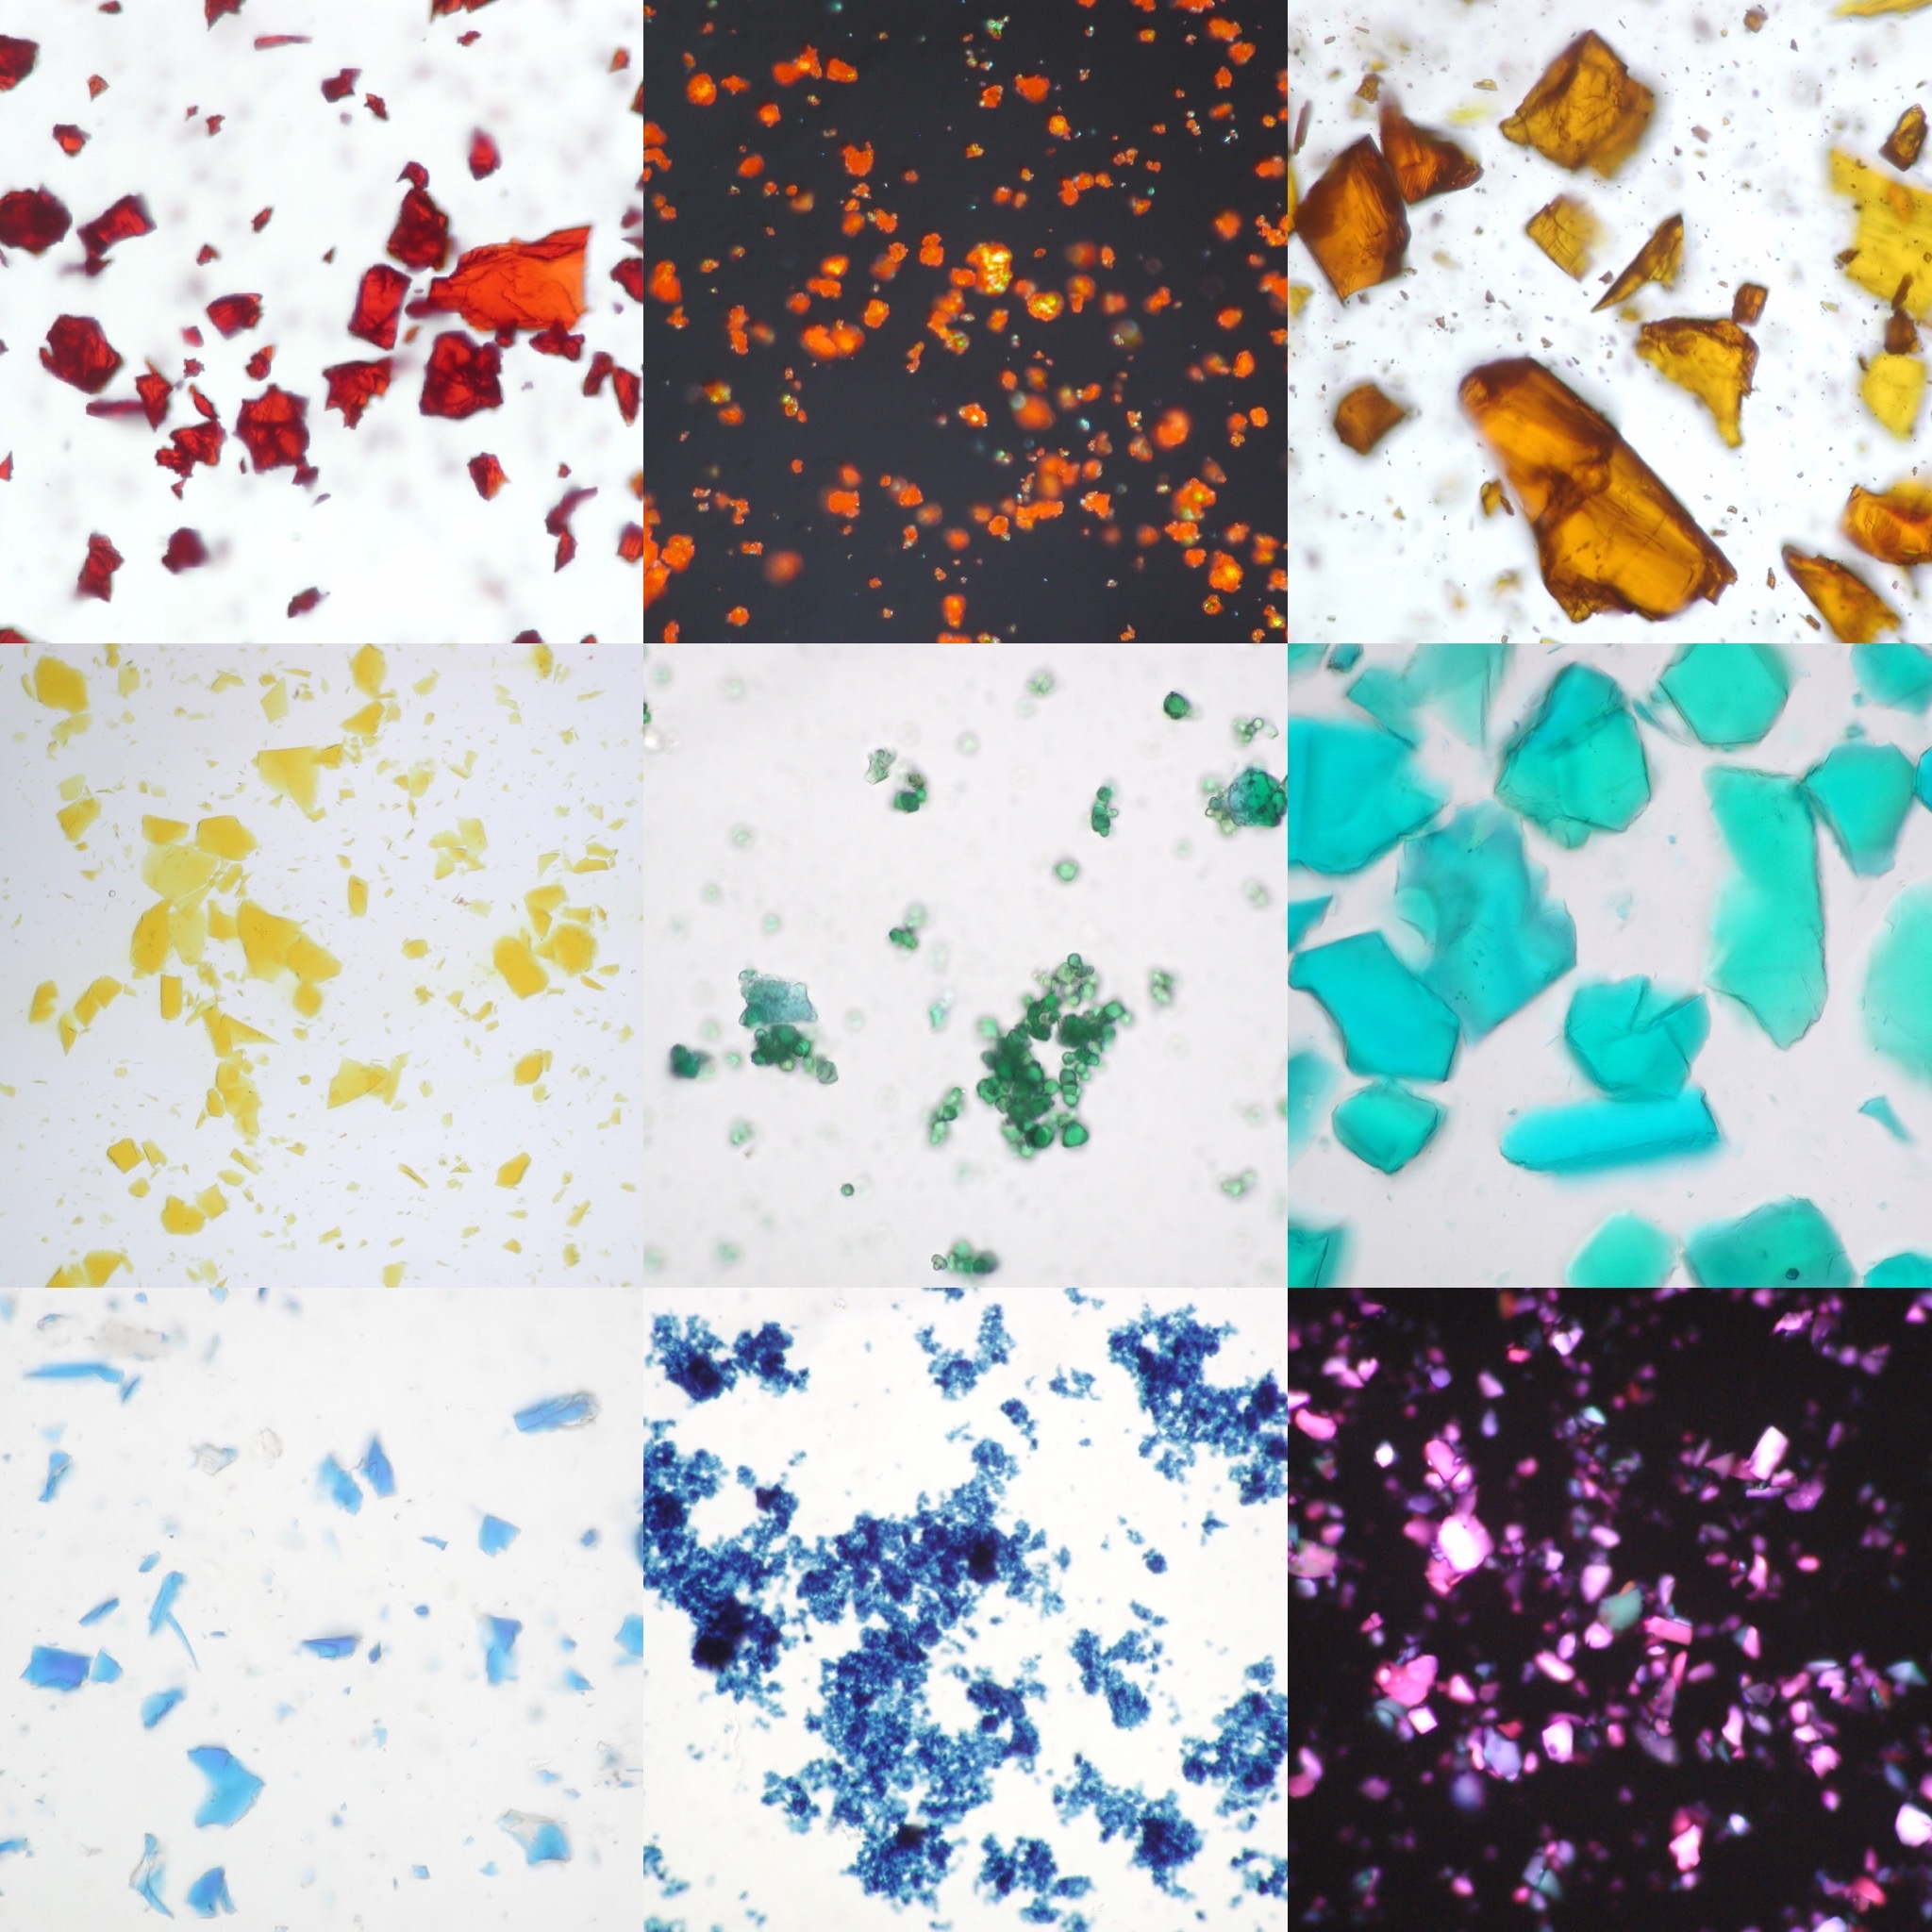 Pigment Microscopy: A tool for the identification of pigments in works of art by Ruth Siddall